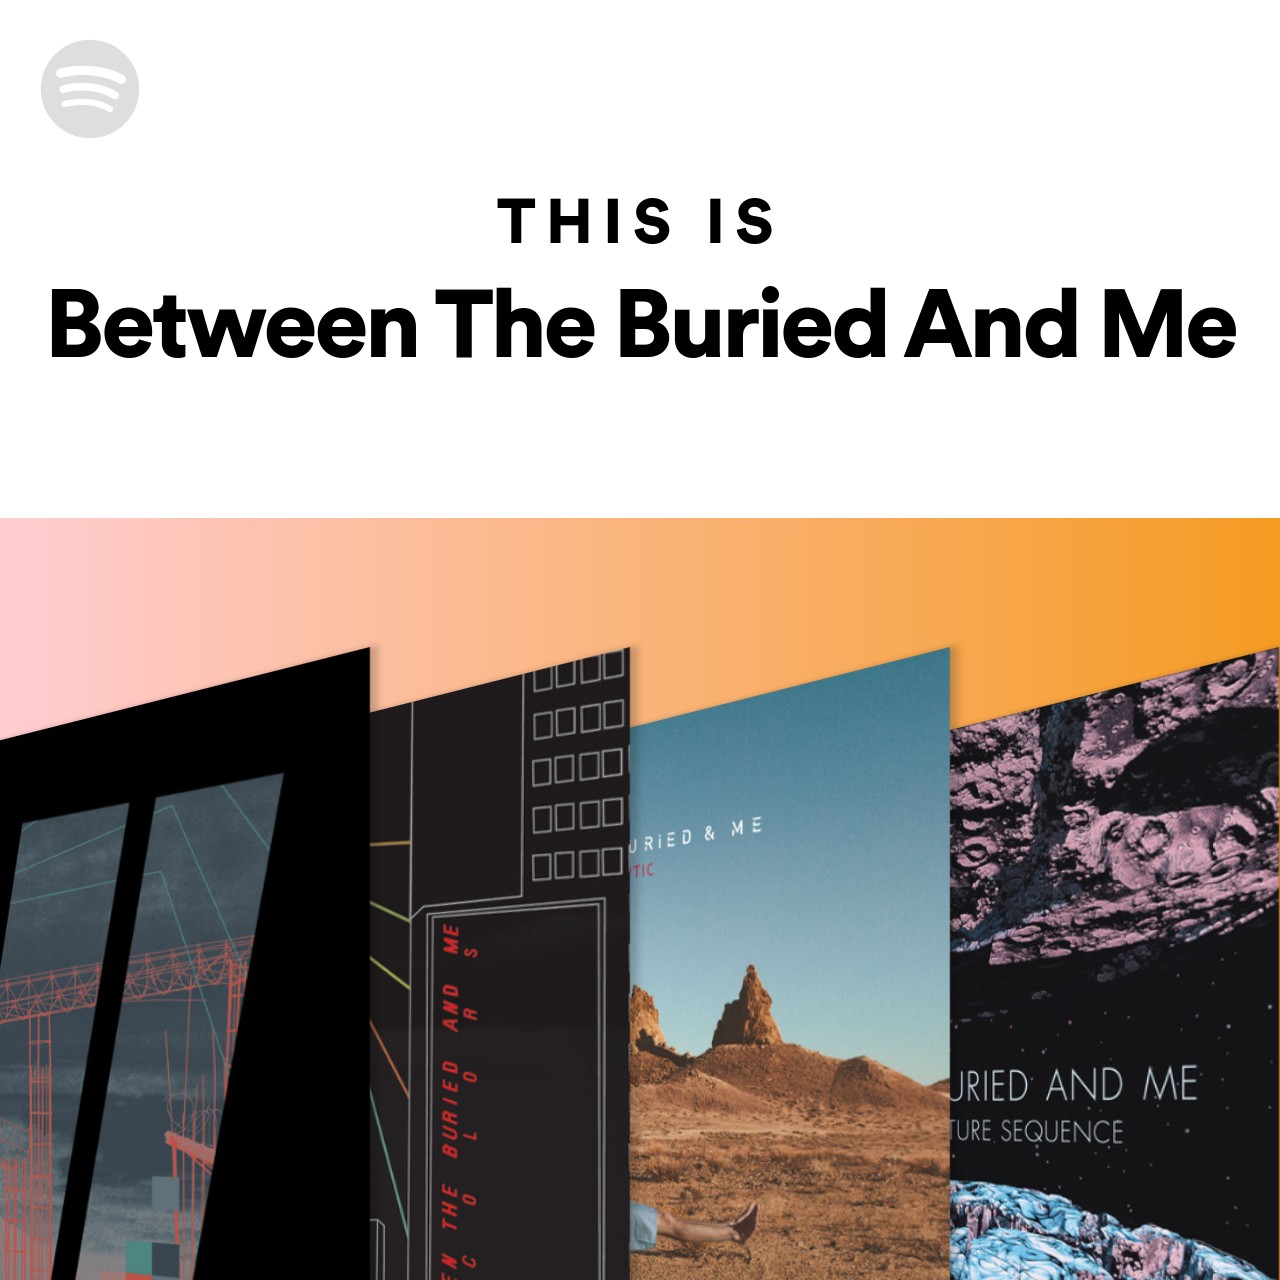 This Is Between The Buried And Me